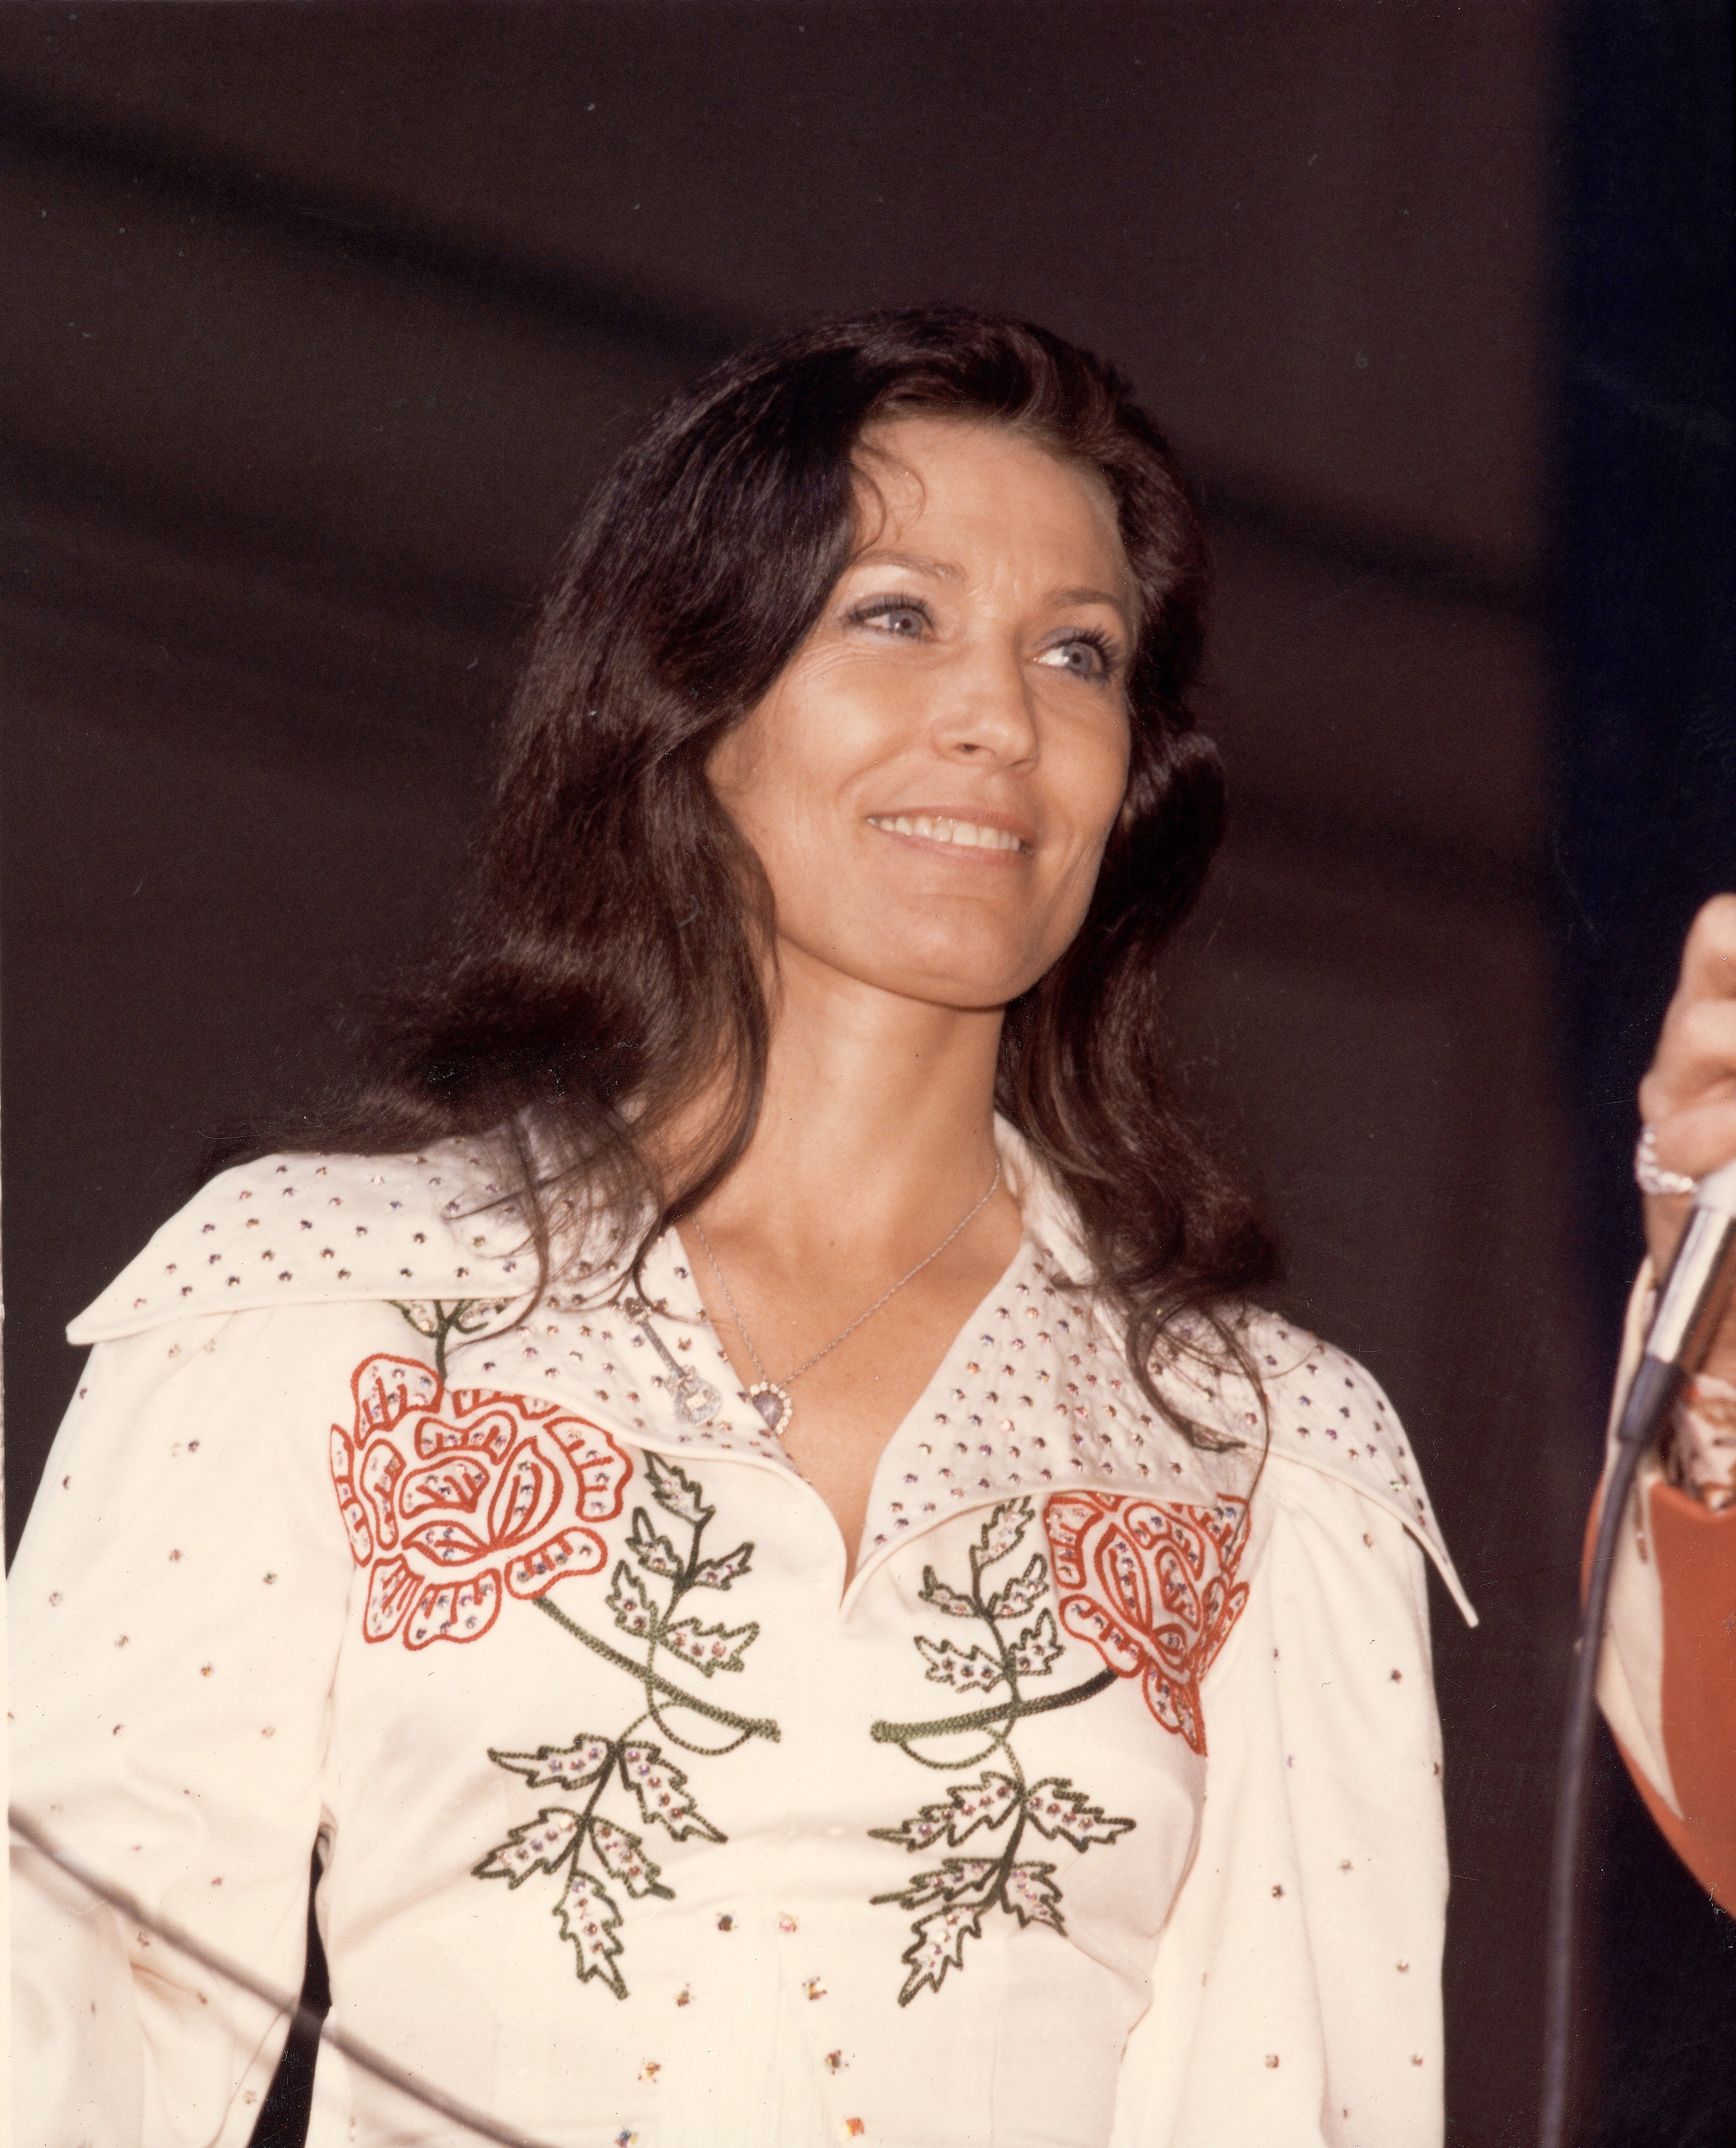 Country music singer Loretta Lynn holding a microphone onstage in the late 1970s | Photo: Getty Images